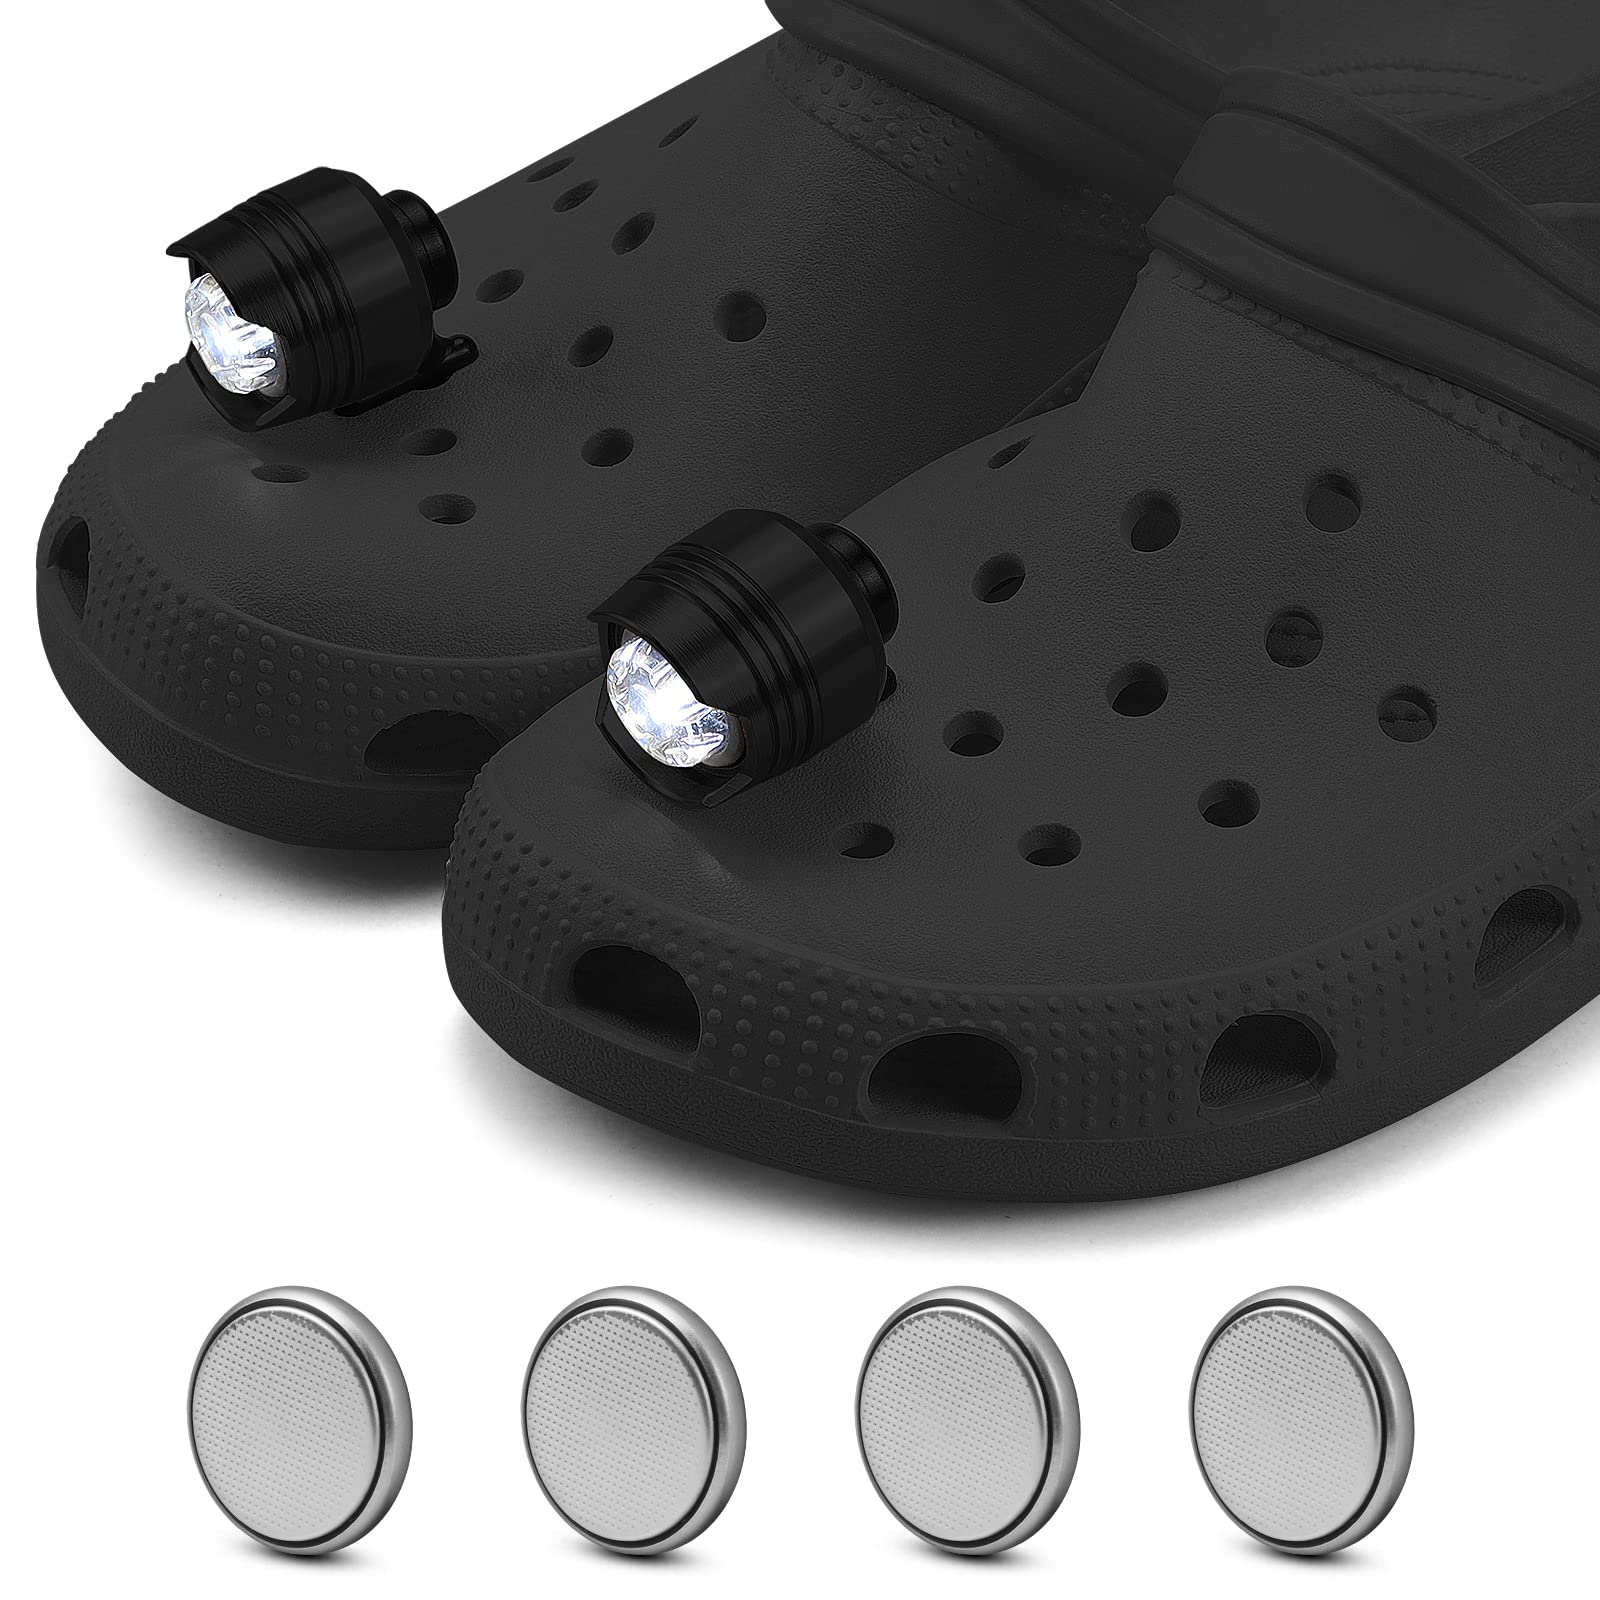 KelejakaMT 2 Pcs Croc Lights, Croc Headlights for Croc Accessories, Ipx5 Waterproof Croc Lights Suitable for Kids and Adults Shoes - Three Lighting Modes (Black)